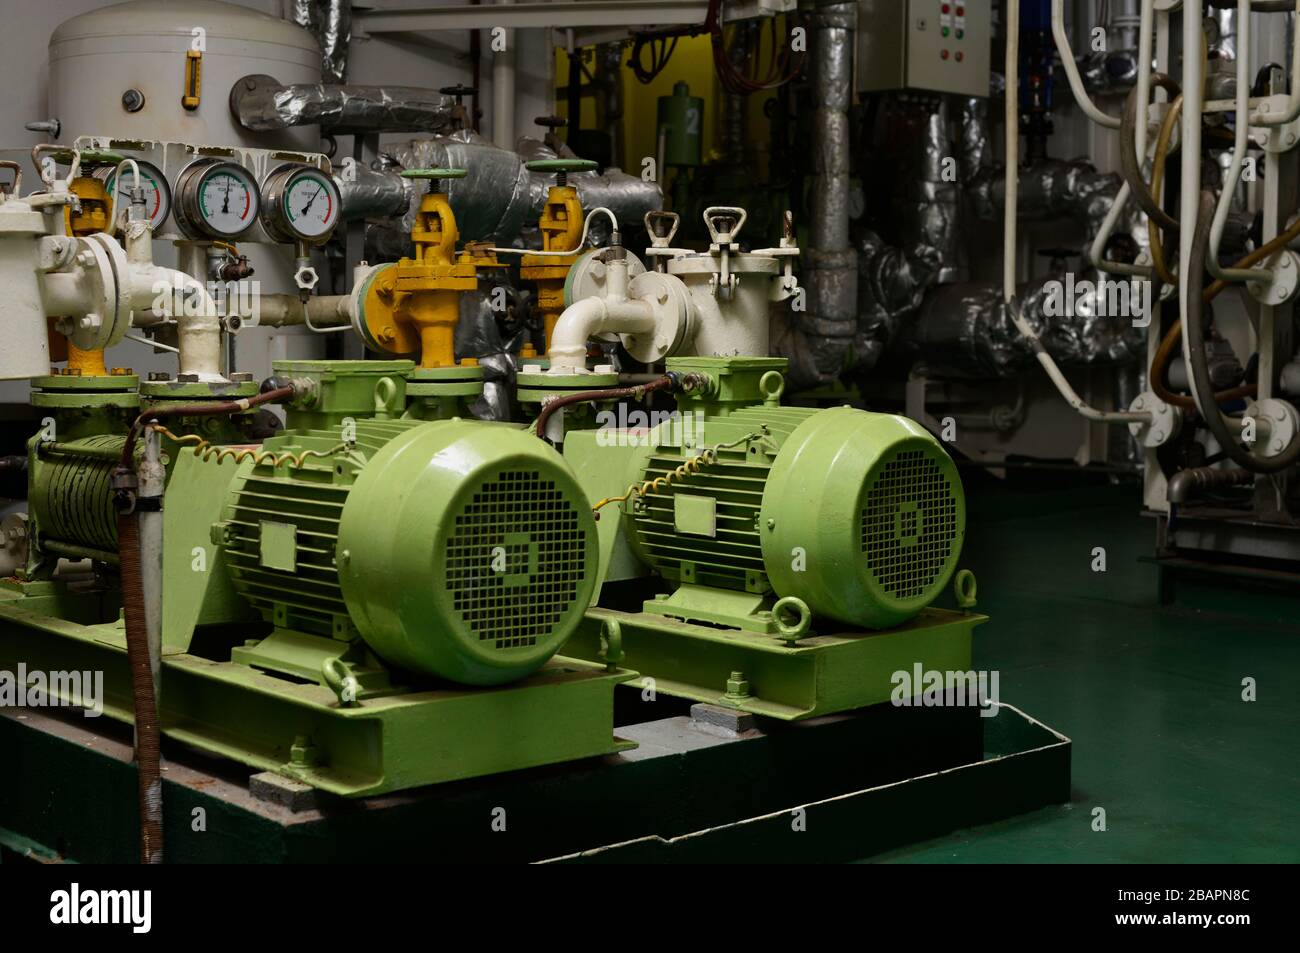 Engine room interior of a big ocean going ship with electrical motors,  piping, gauges, valves etc Stock Photo - Alamy